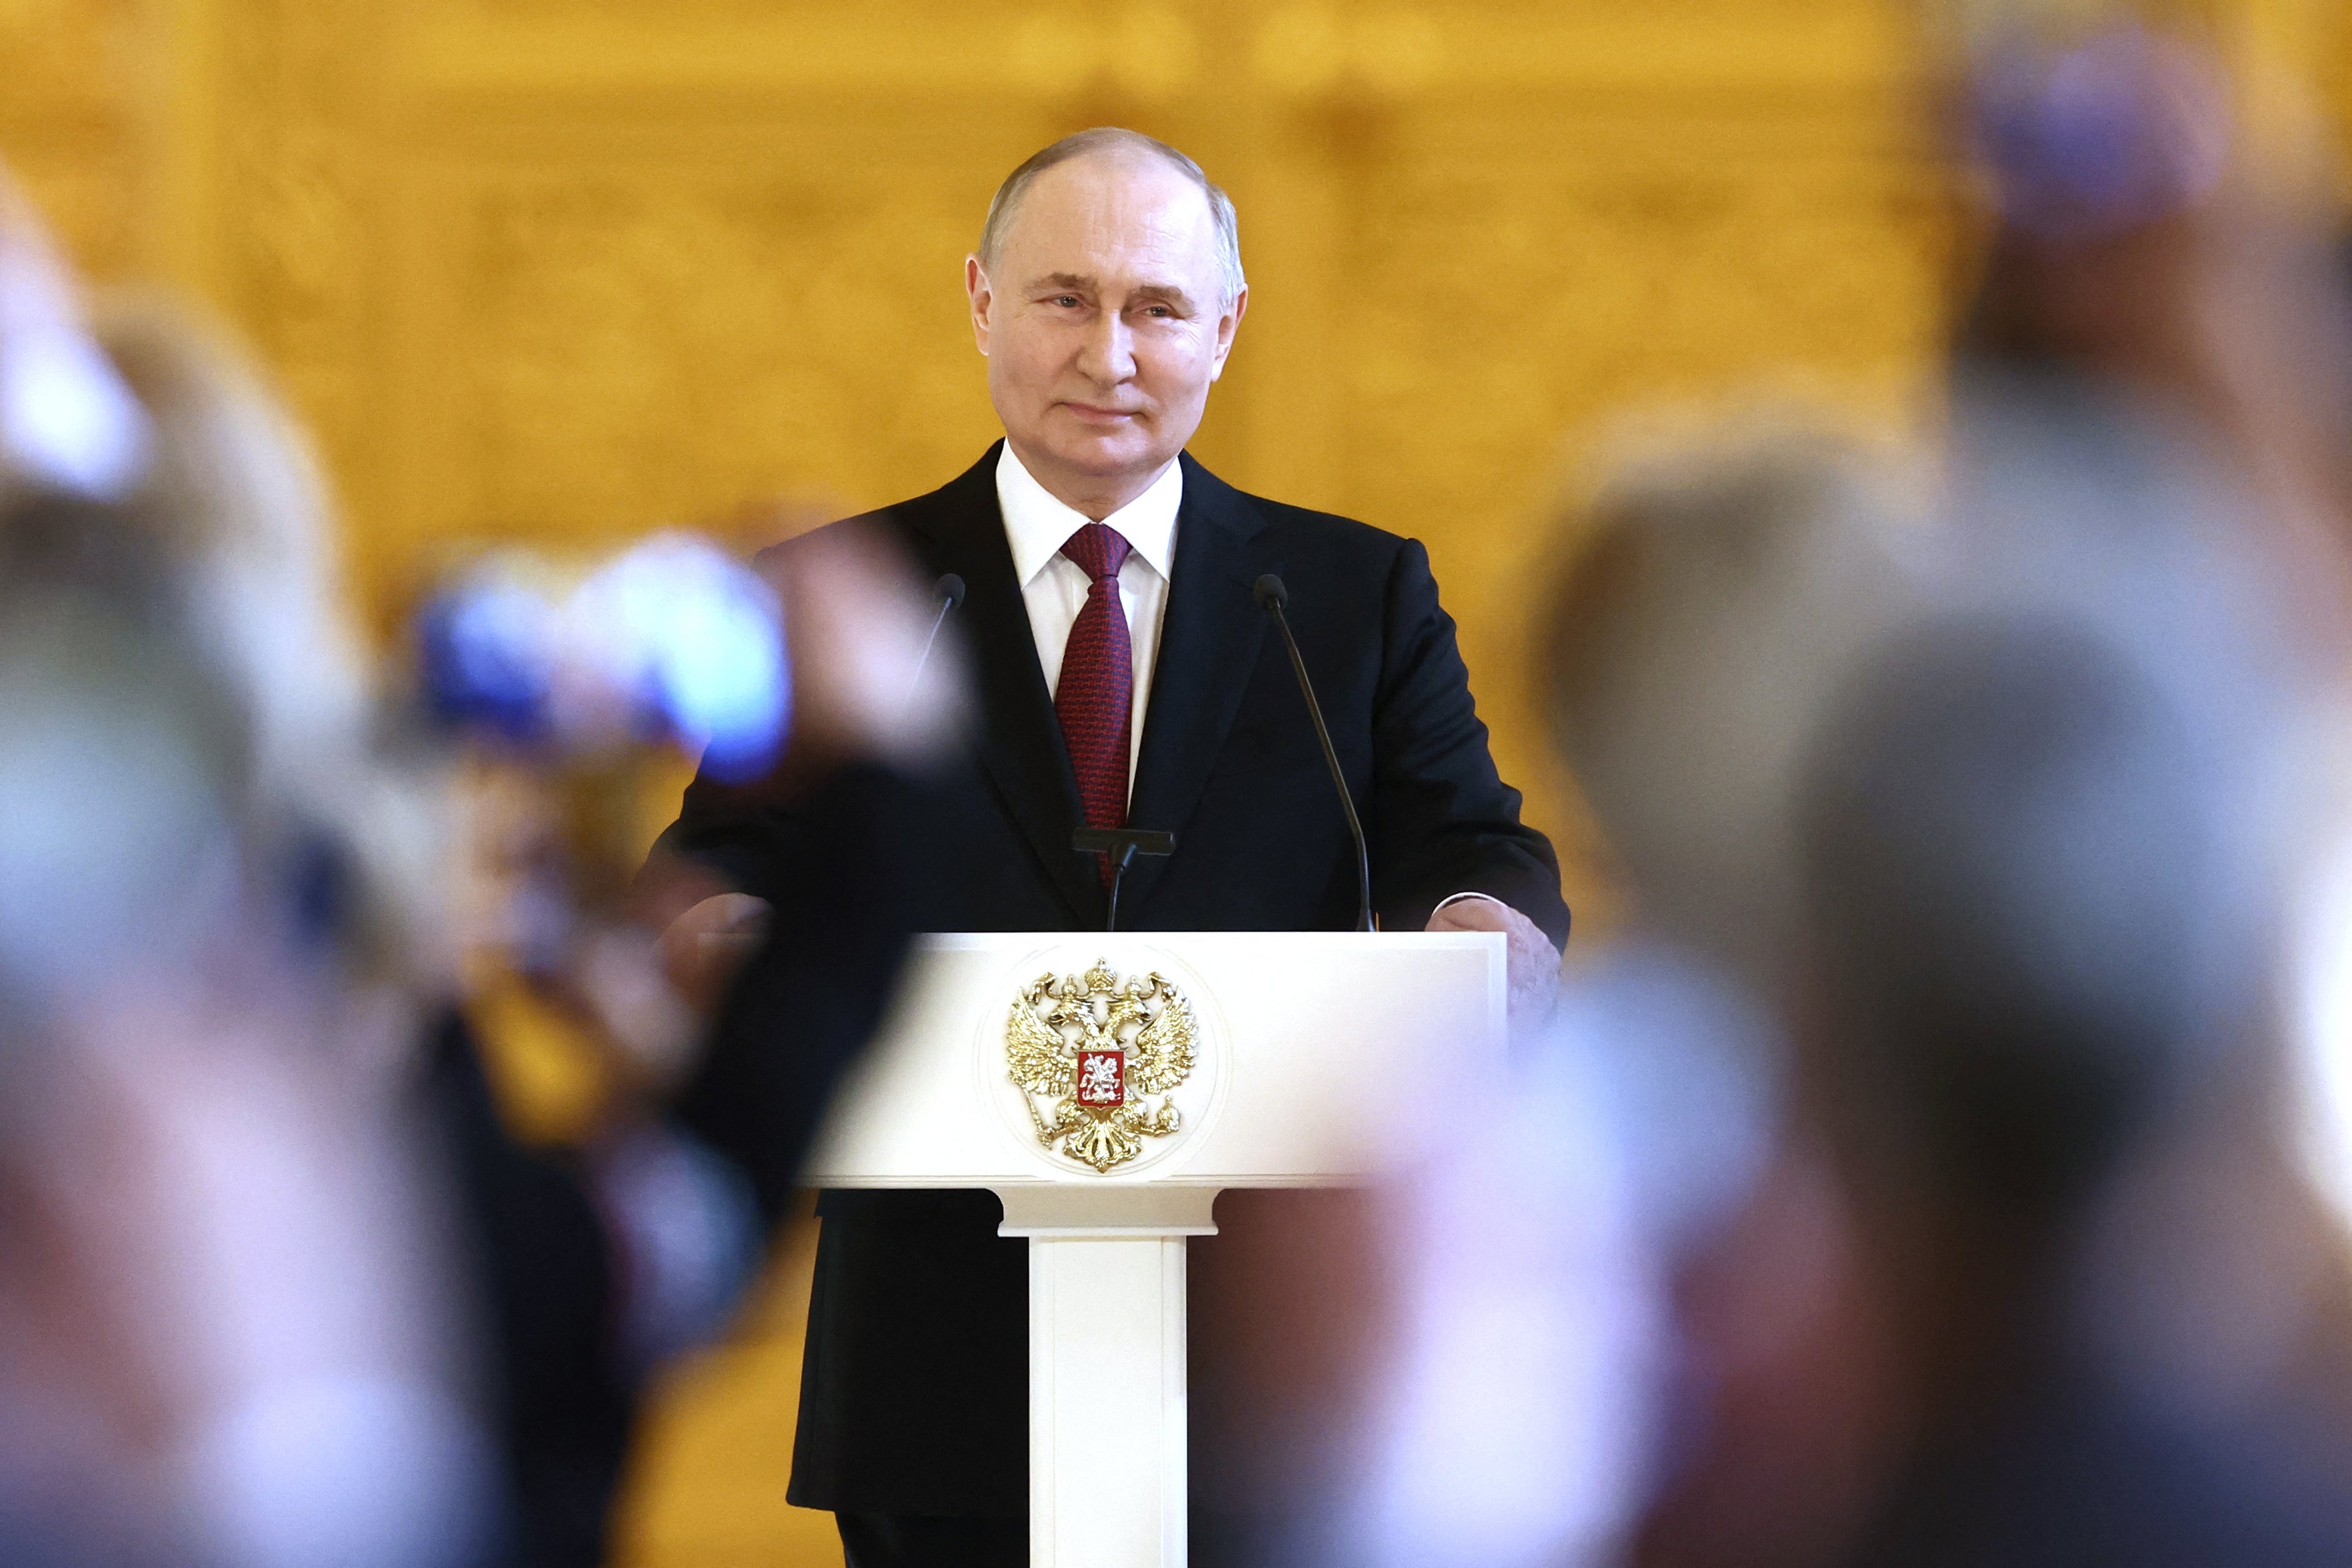 Putin after being sworn in as Russia’s president on Tuesday